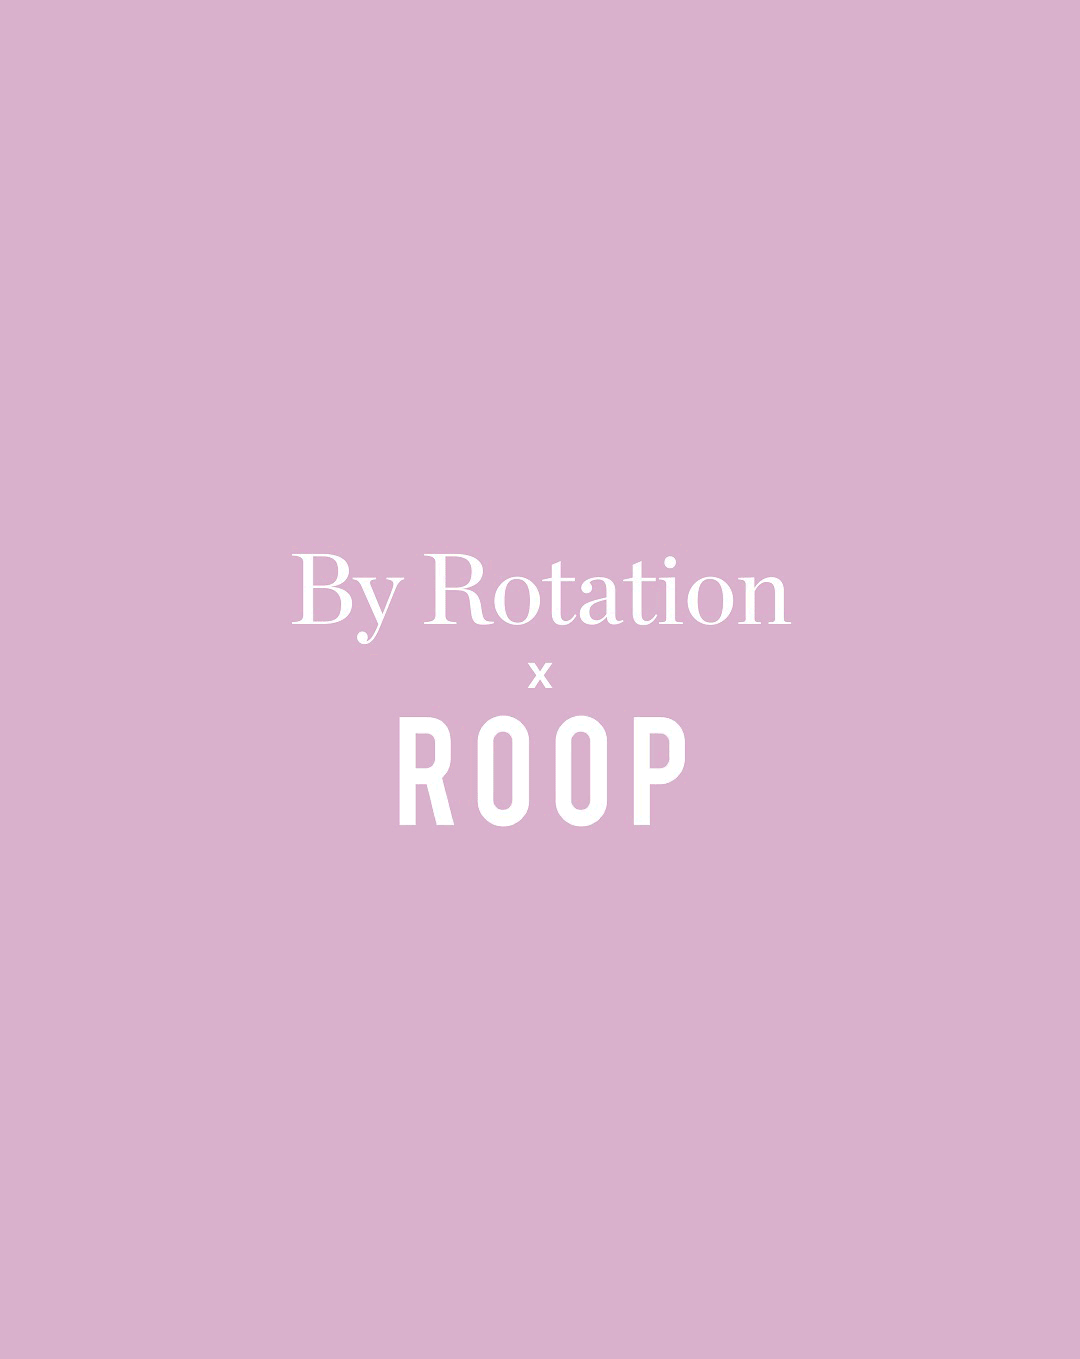 By Rotation x Roop